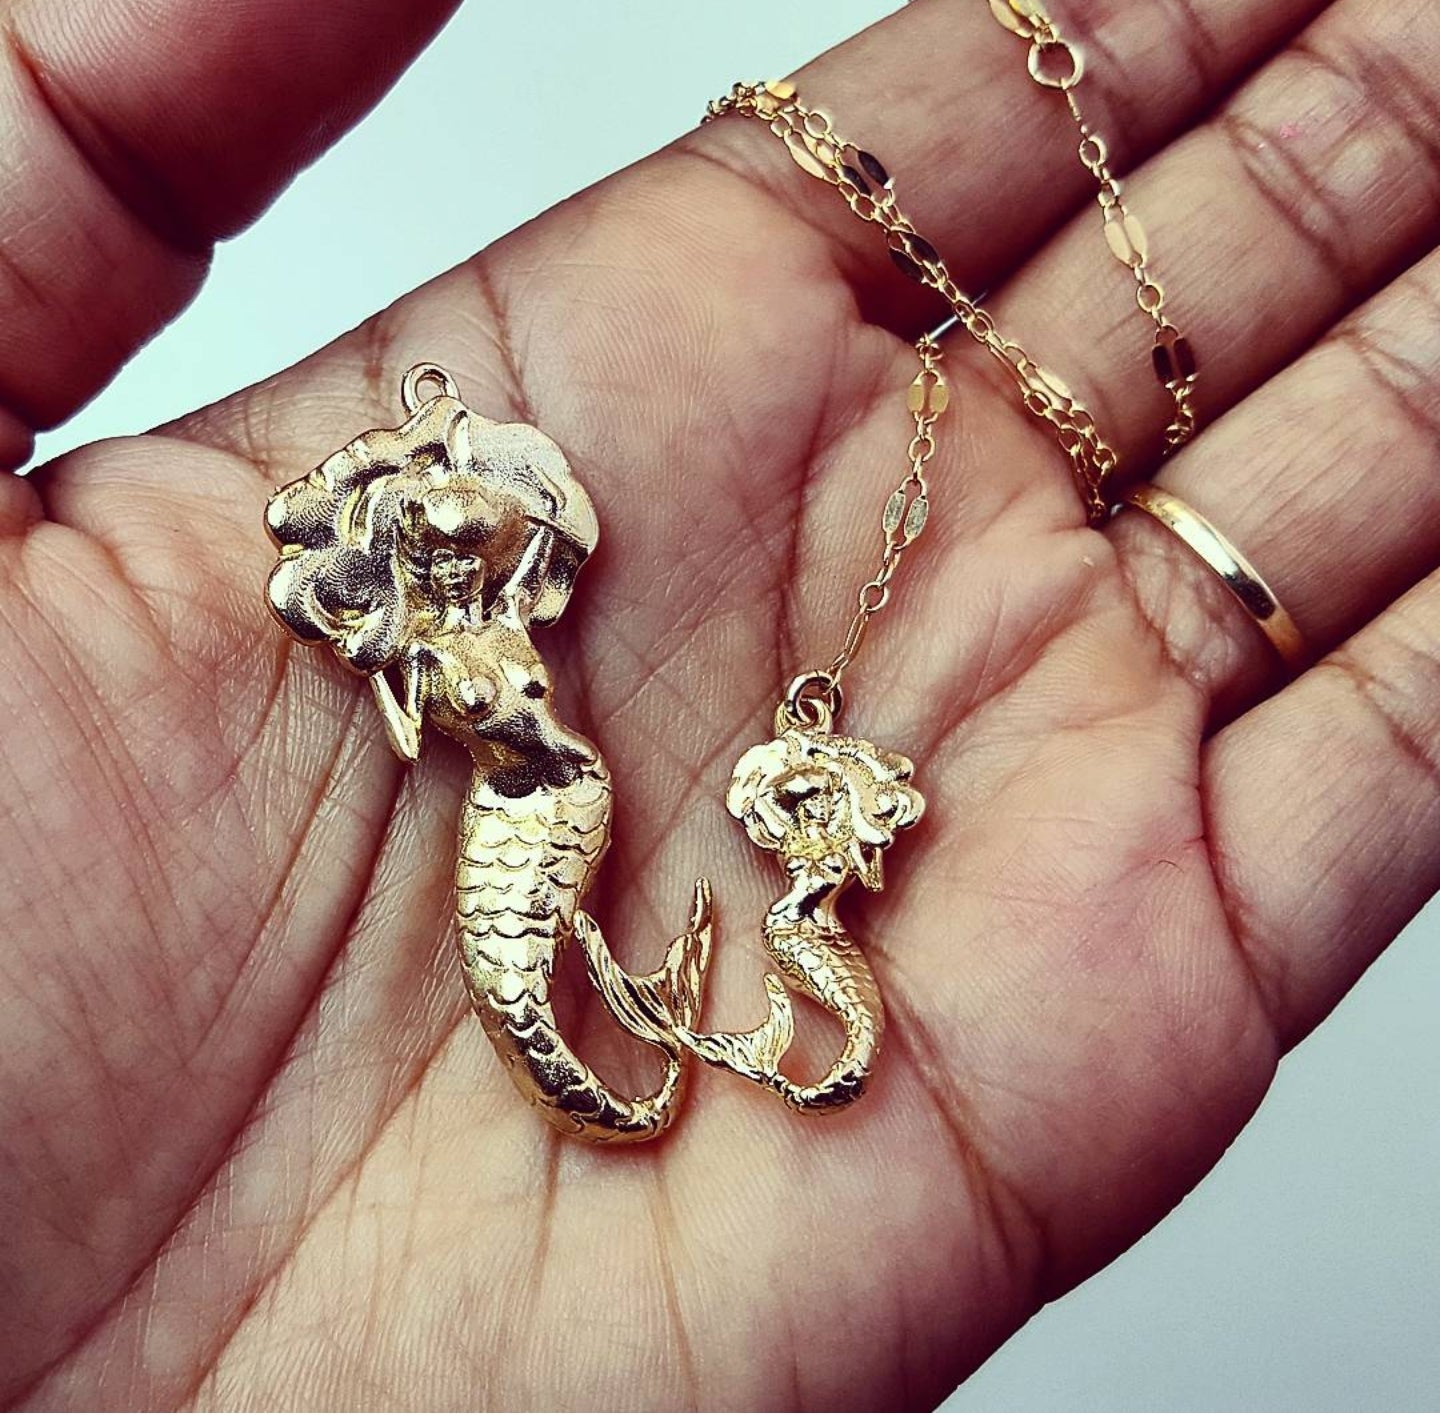 1" Afro Mermaid Necklace [BACK IN STOCK 3/23]